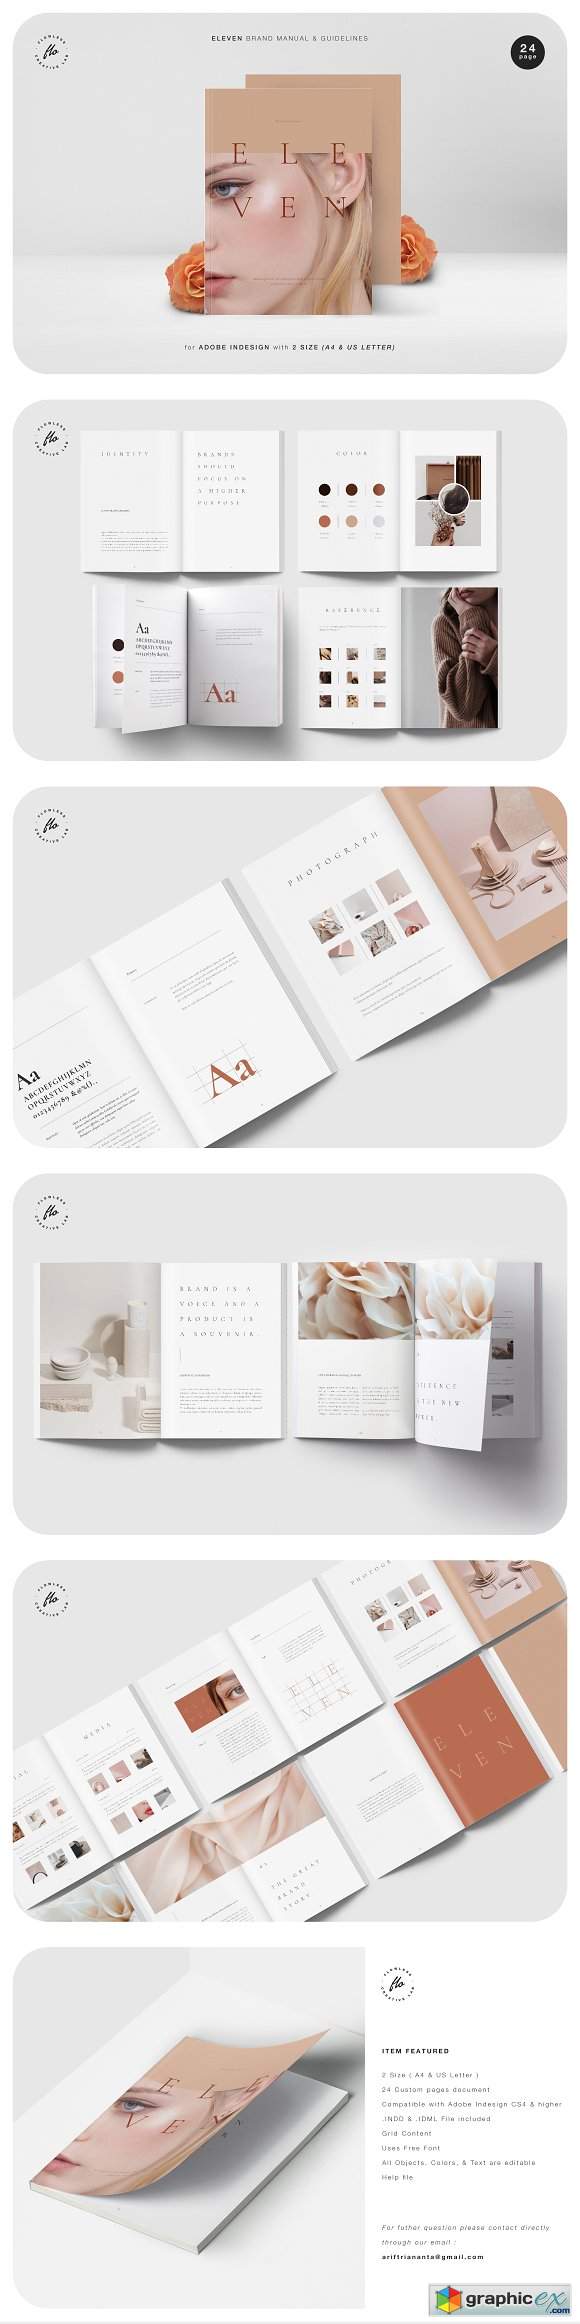 ELEVEN Brand Manual & Guidelines